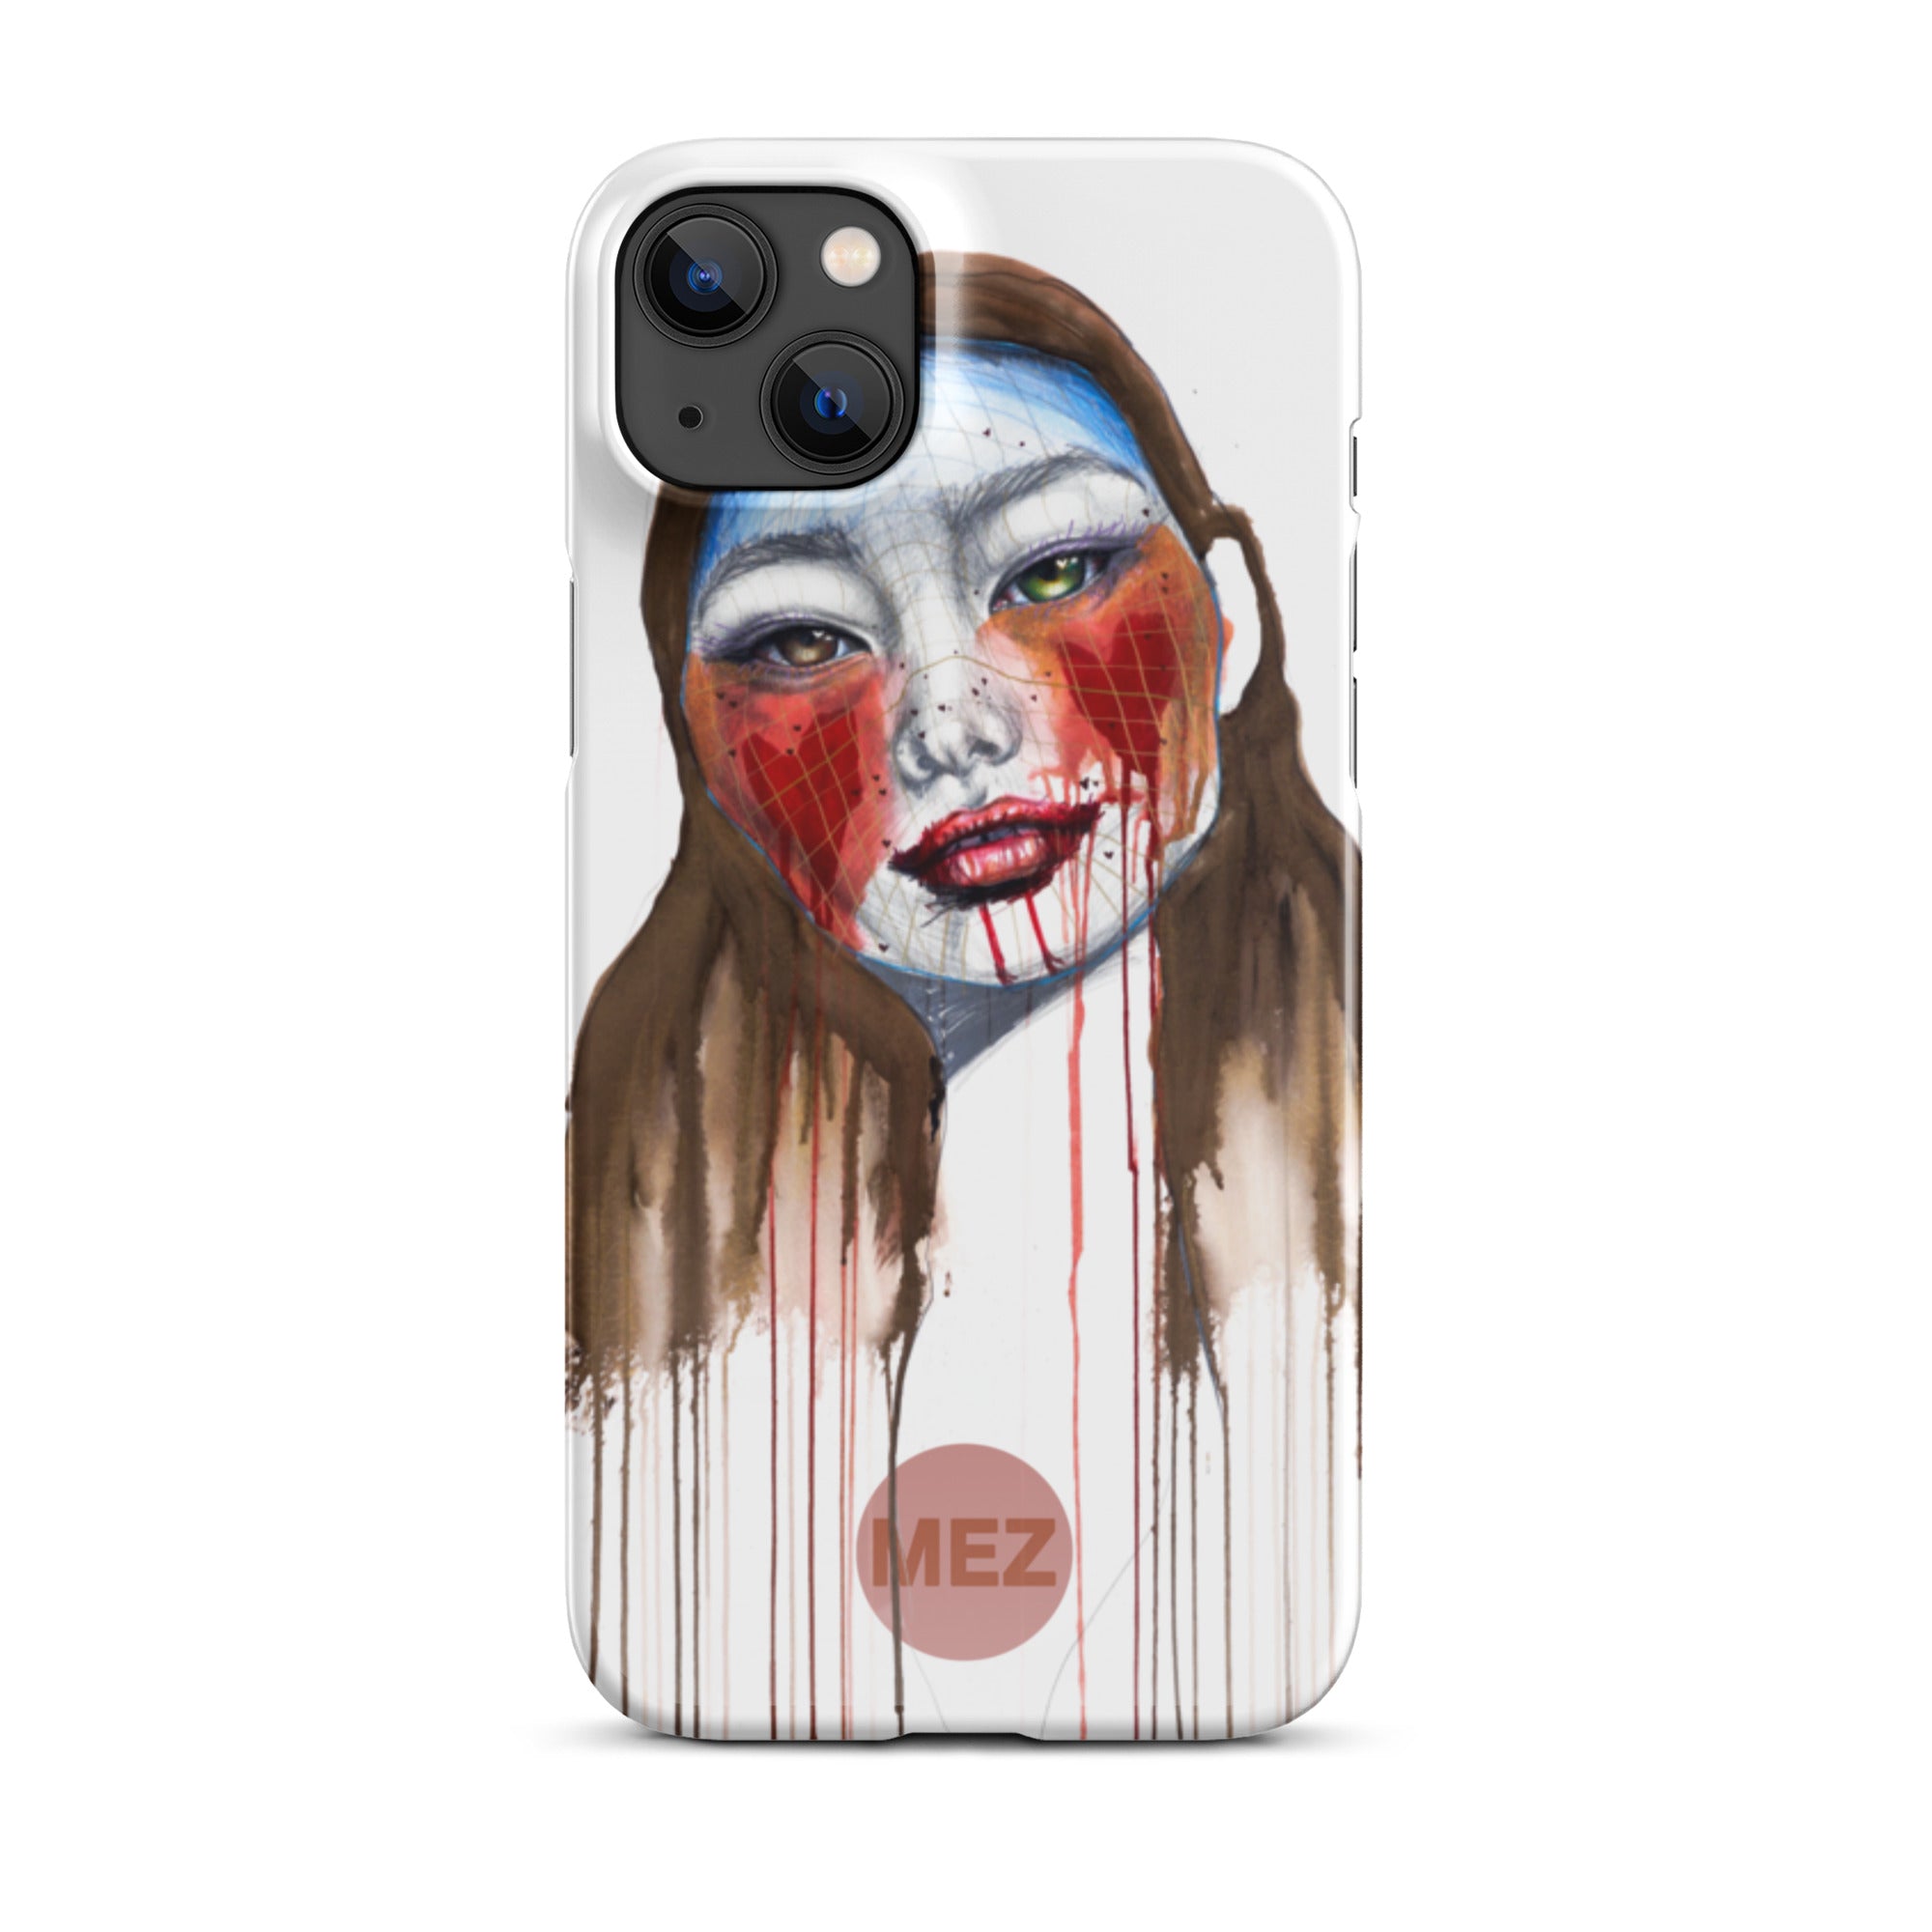 “MEZ” Snap case for iPhone®